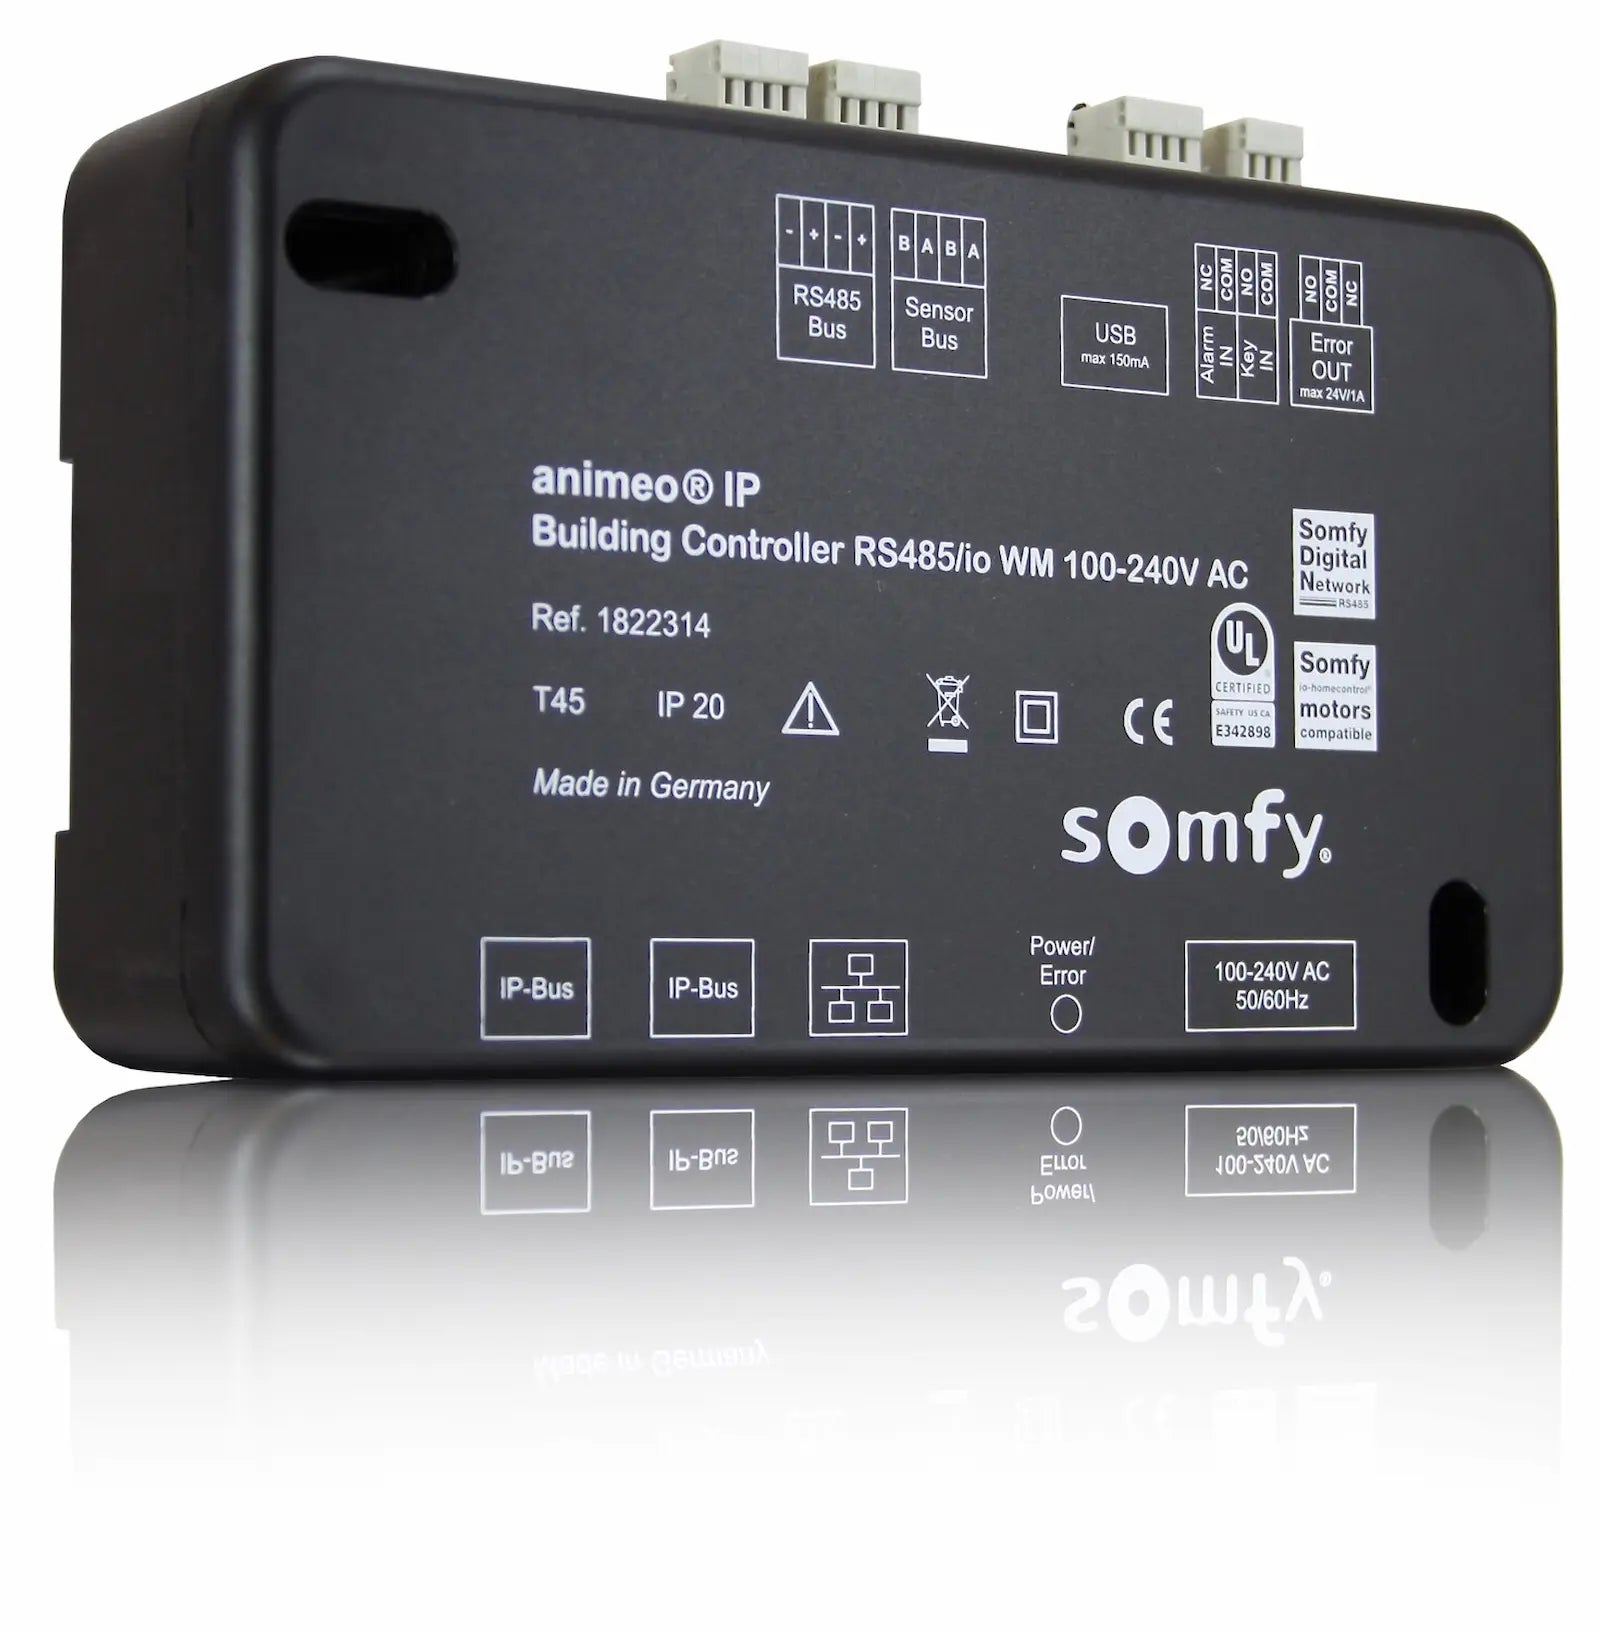 Somfy Animeo® IP Building Controller 1822314